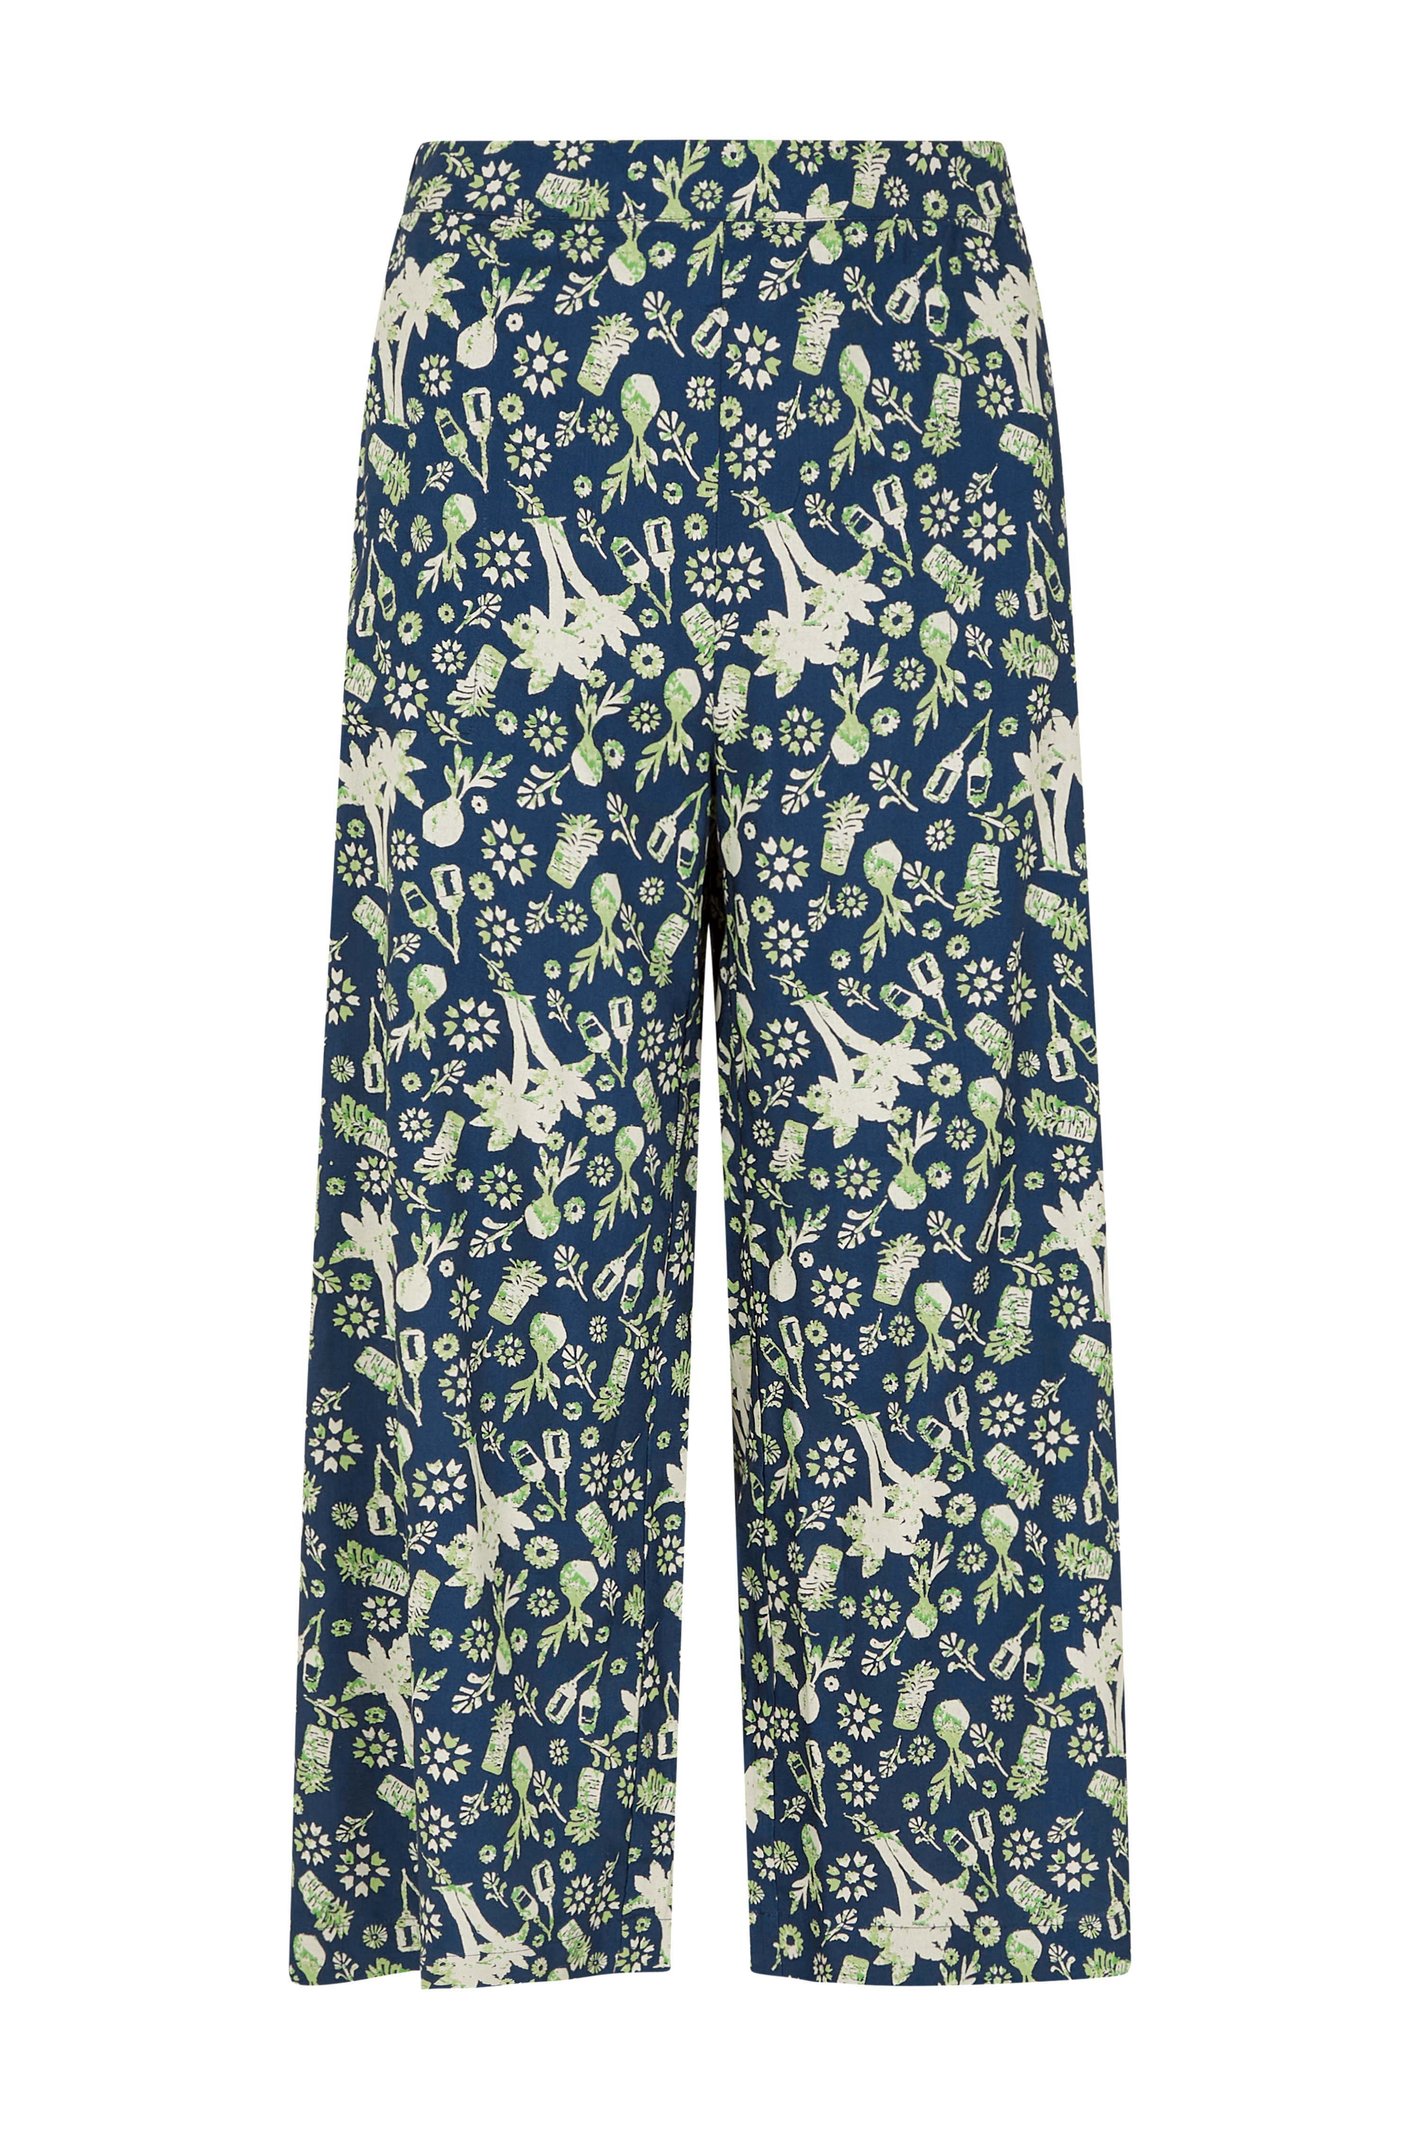 Weird Fish Tresco Eco Viscose Printed Wide Leg Cropped Trousers Ensign Blue Size 14